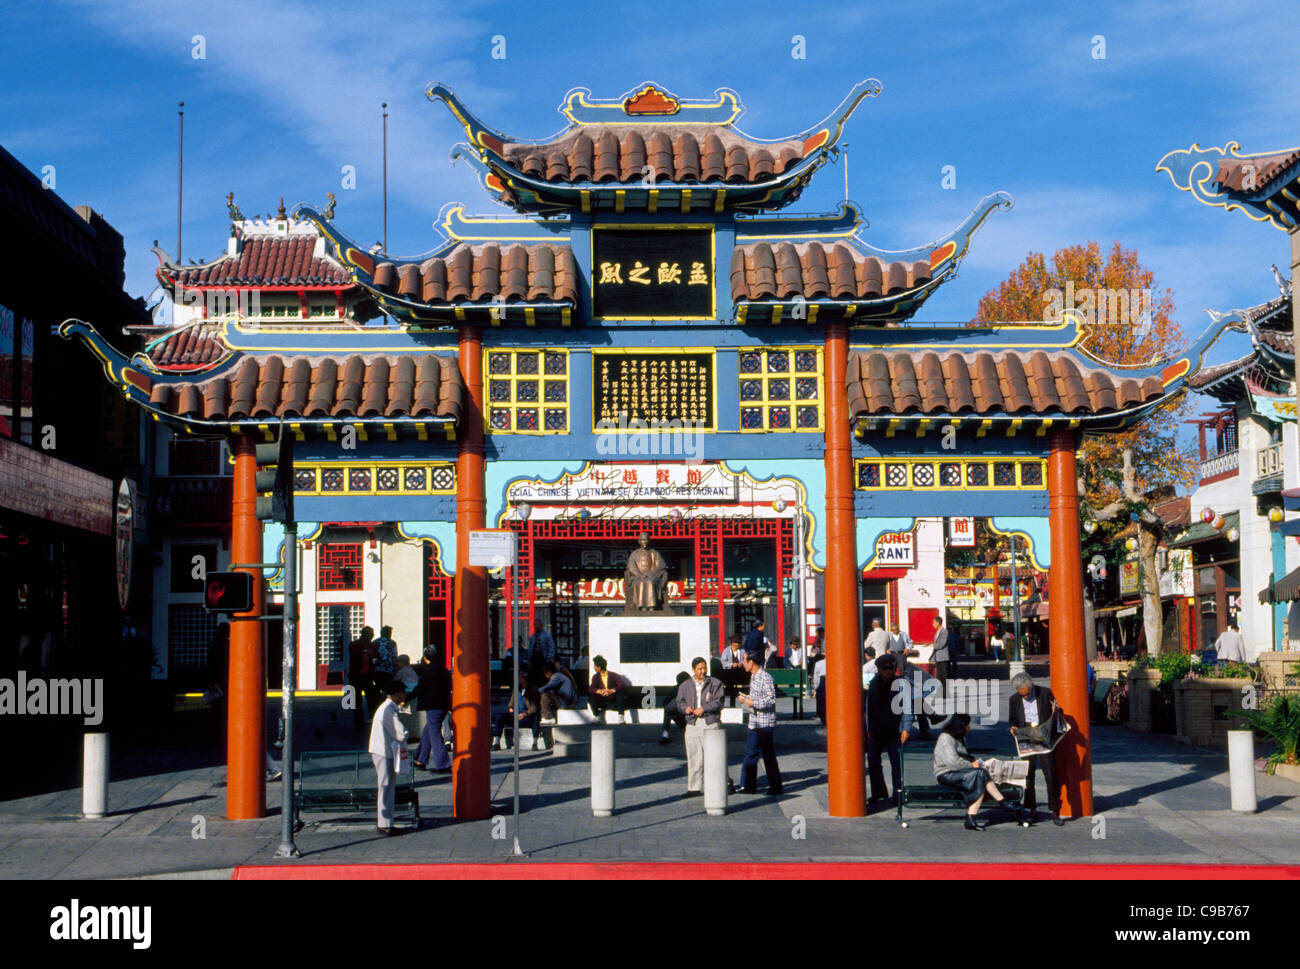 A Colorful Chinese Gateway Marks The Entrance To The Central Plaza Of Stock Photo Alamy